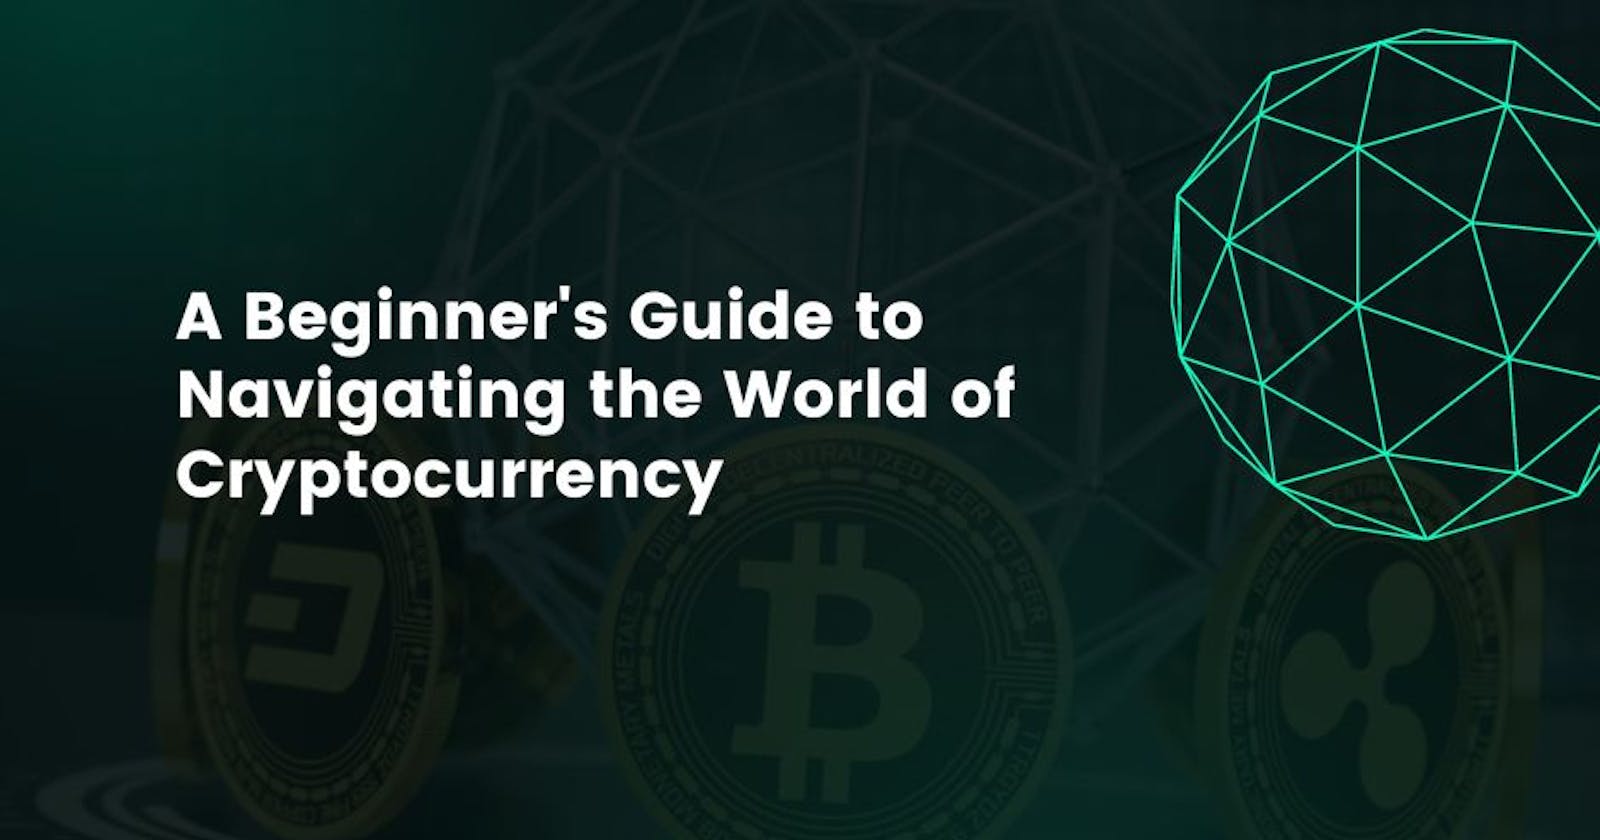 A Beginner's Guide to Navigating the World of Cryptocurrency